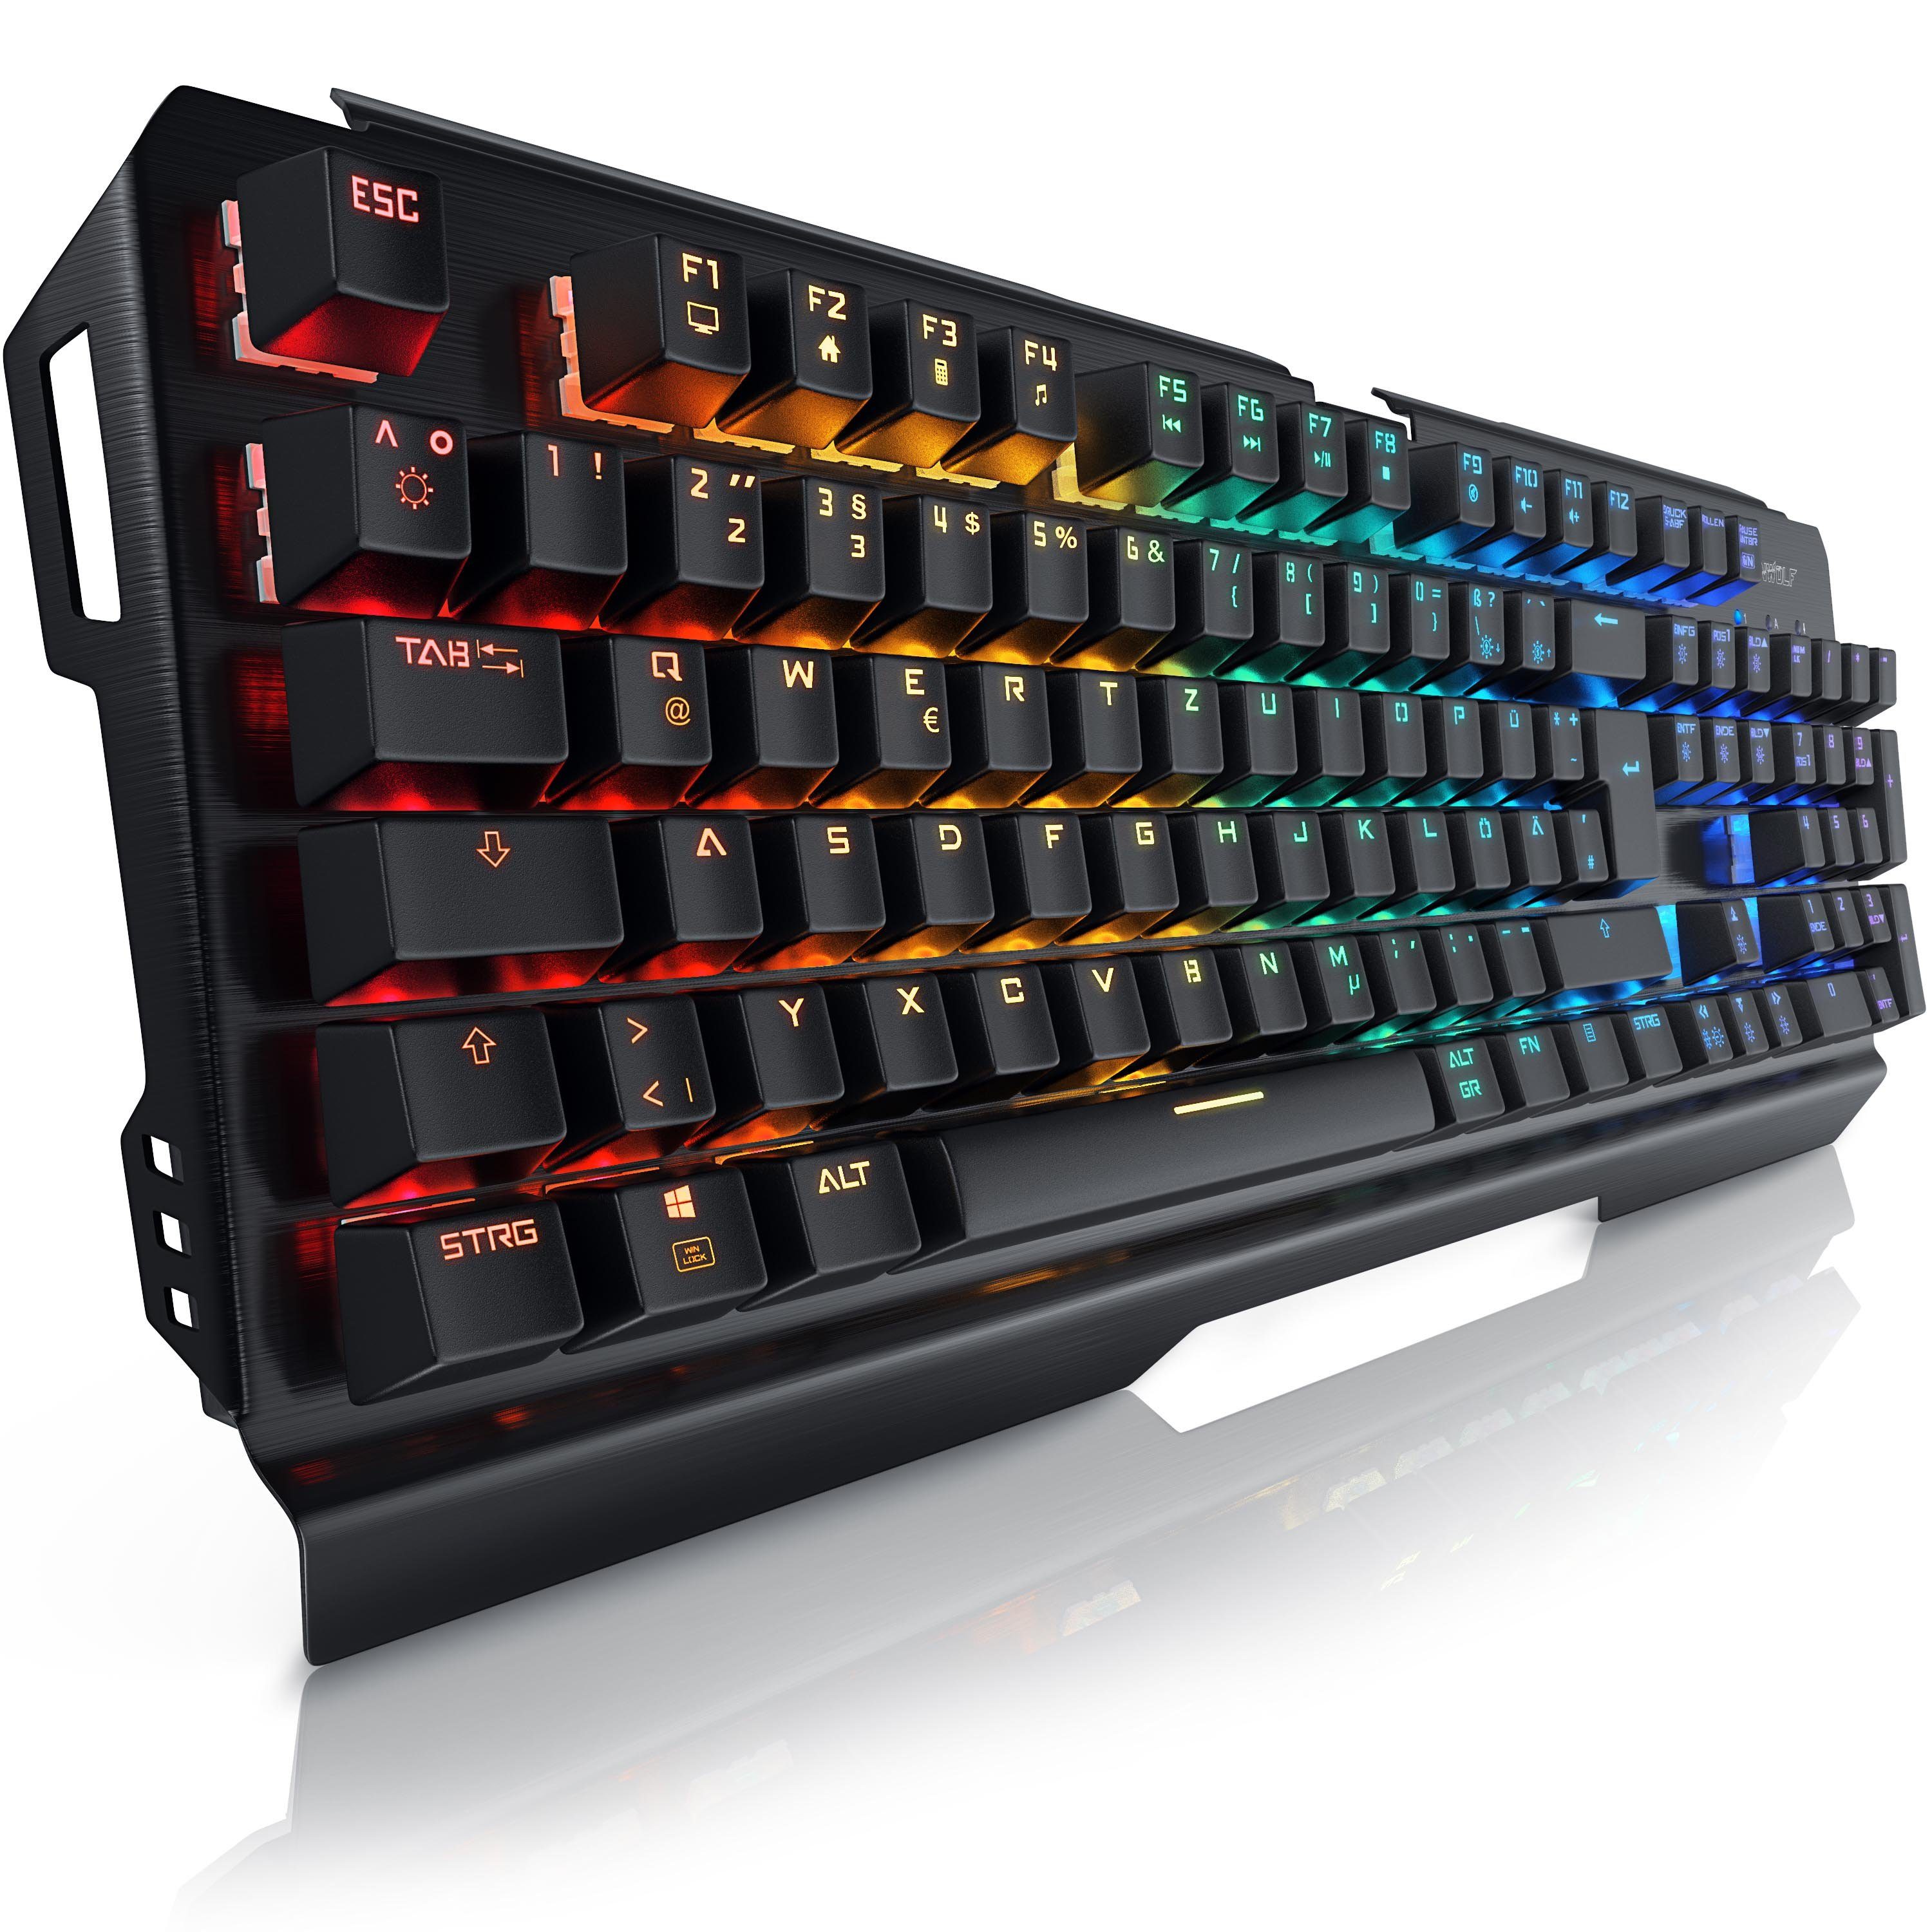 (mechanisches Anti-Ghosting, Kailh LED-Beleuchtung) Gaming-Tastatur Blue, Titanwolf Keyboard,